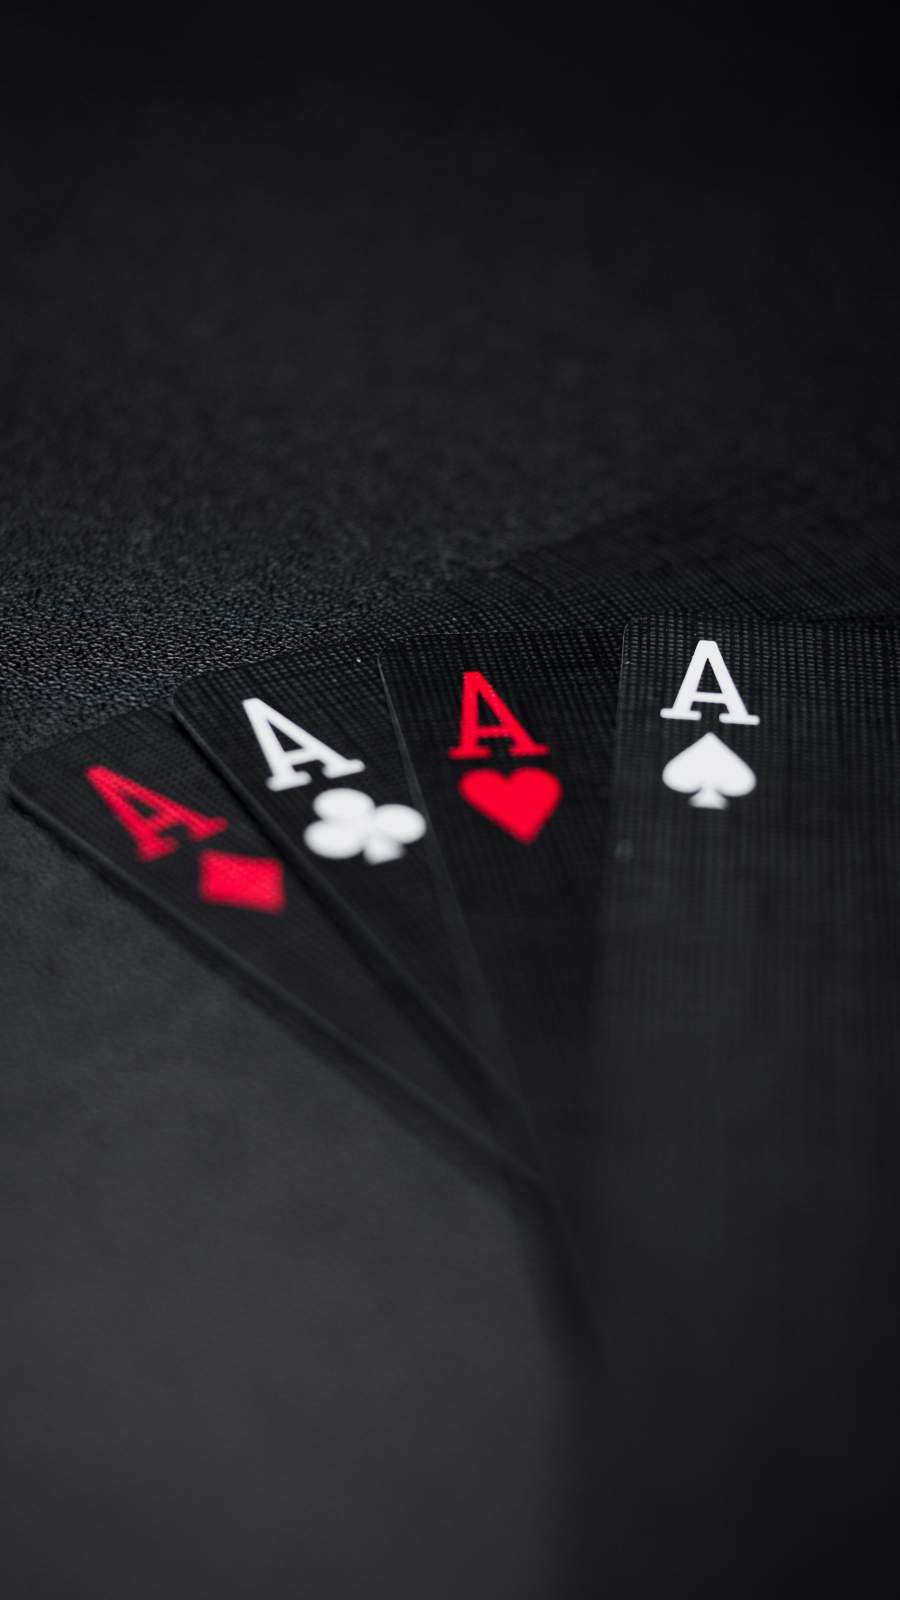 Playing Cards Wallpapers For Mobile  Wallpaper Cave